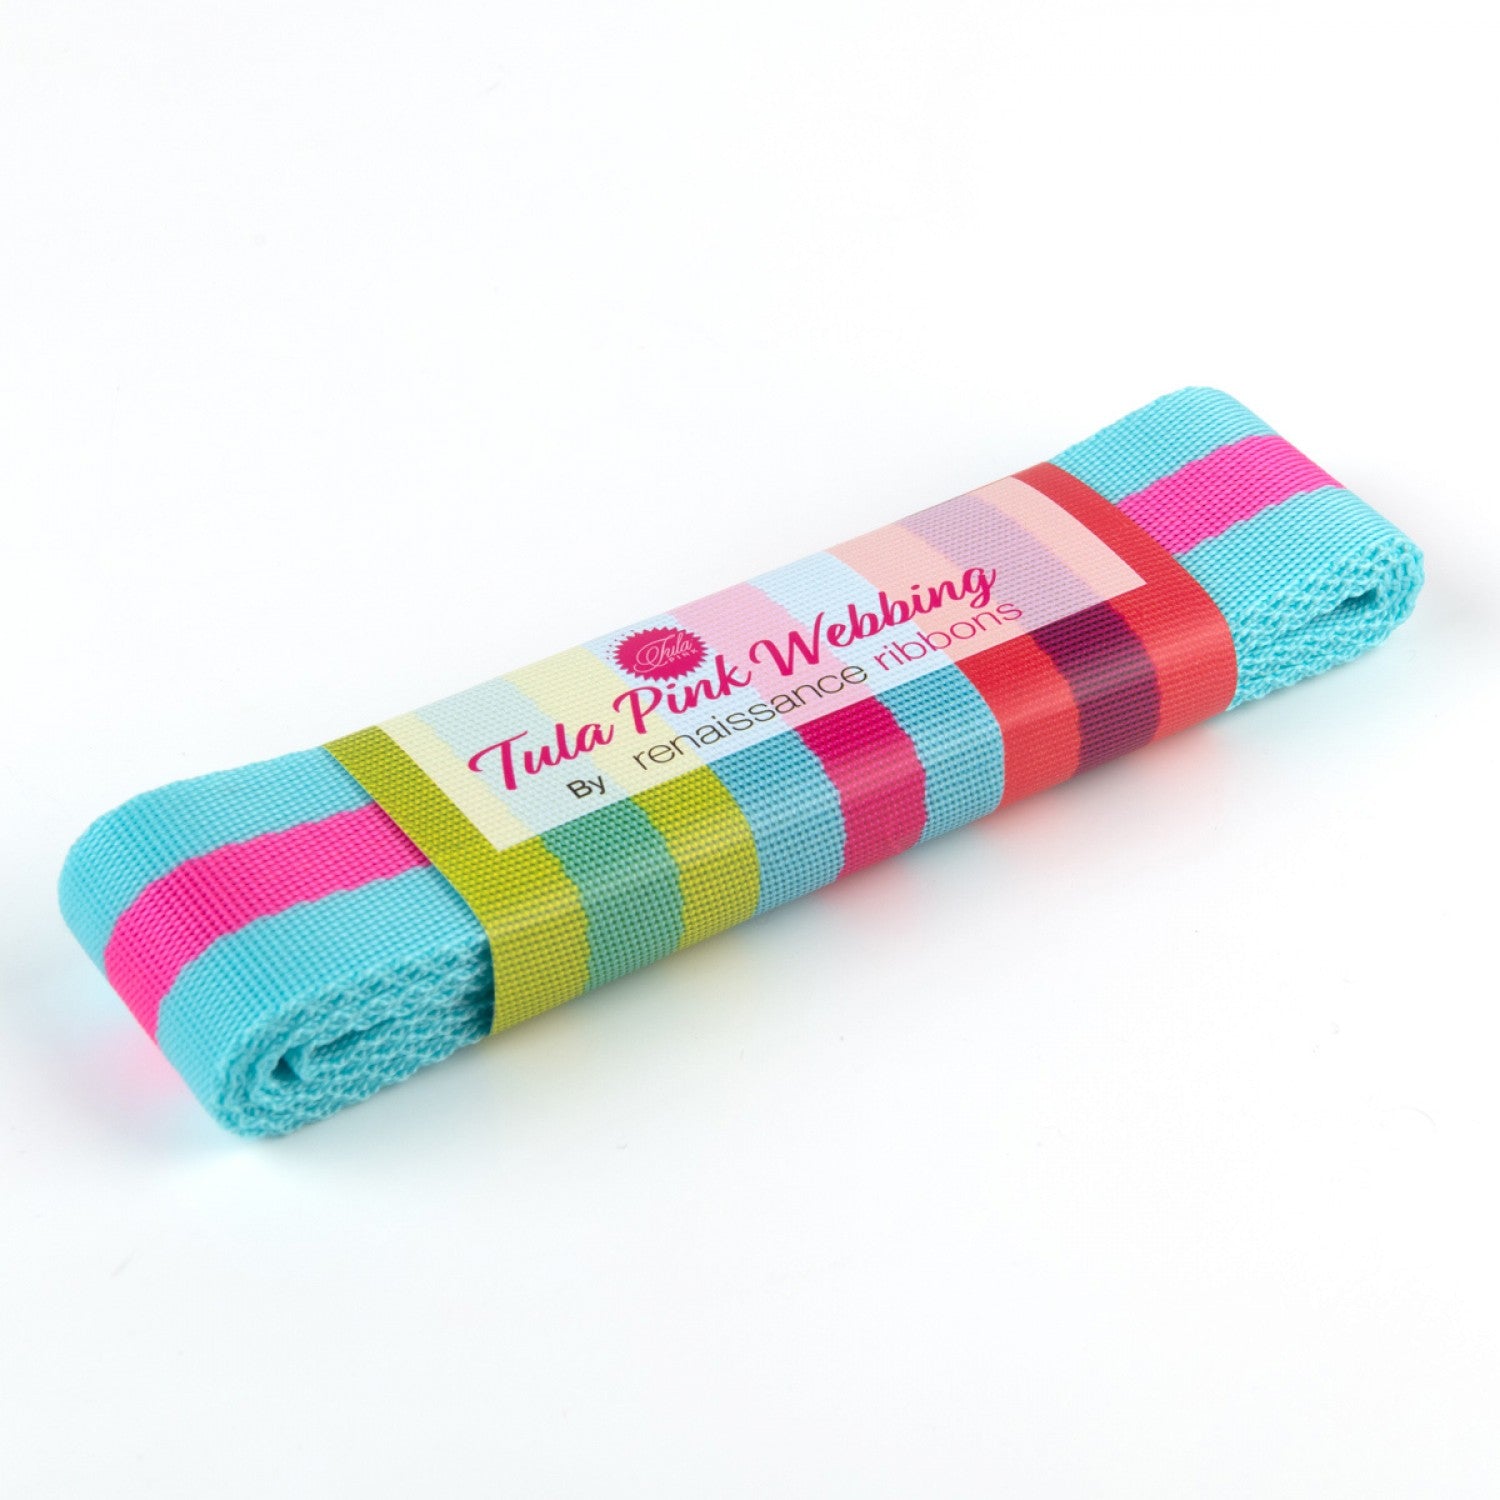 Tula Pink striped Nylon Webbing - 1.5in wide - Tula Special: Blue Aqua with Hot Pink - A game Changer in Bag Making!  Color: Blue and Pink Size: 1.5in x 2yds Use: Bag Making Included: 2 yds bundle